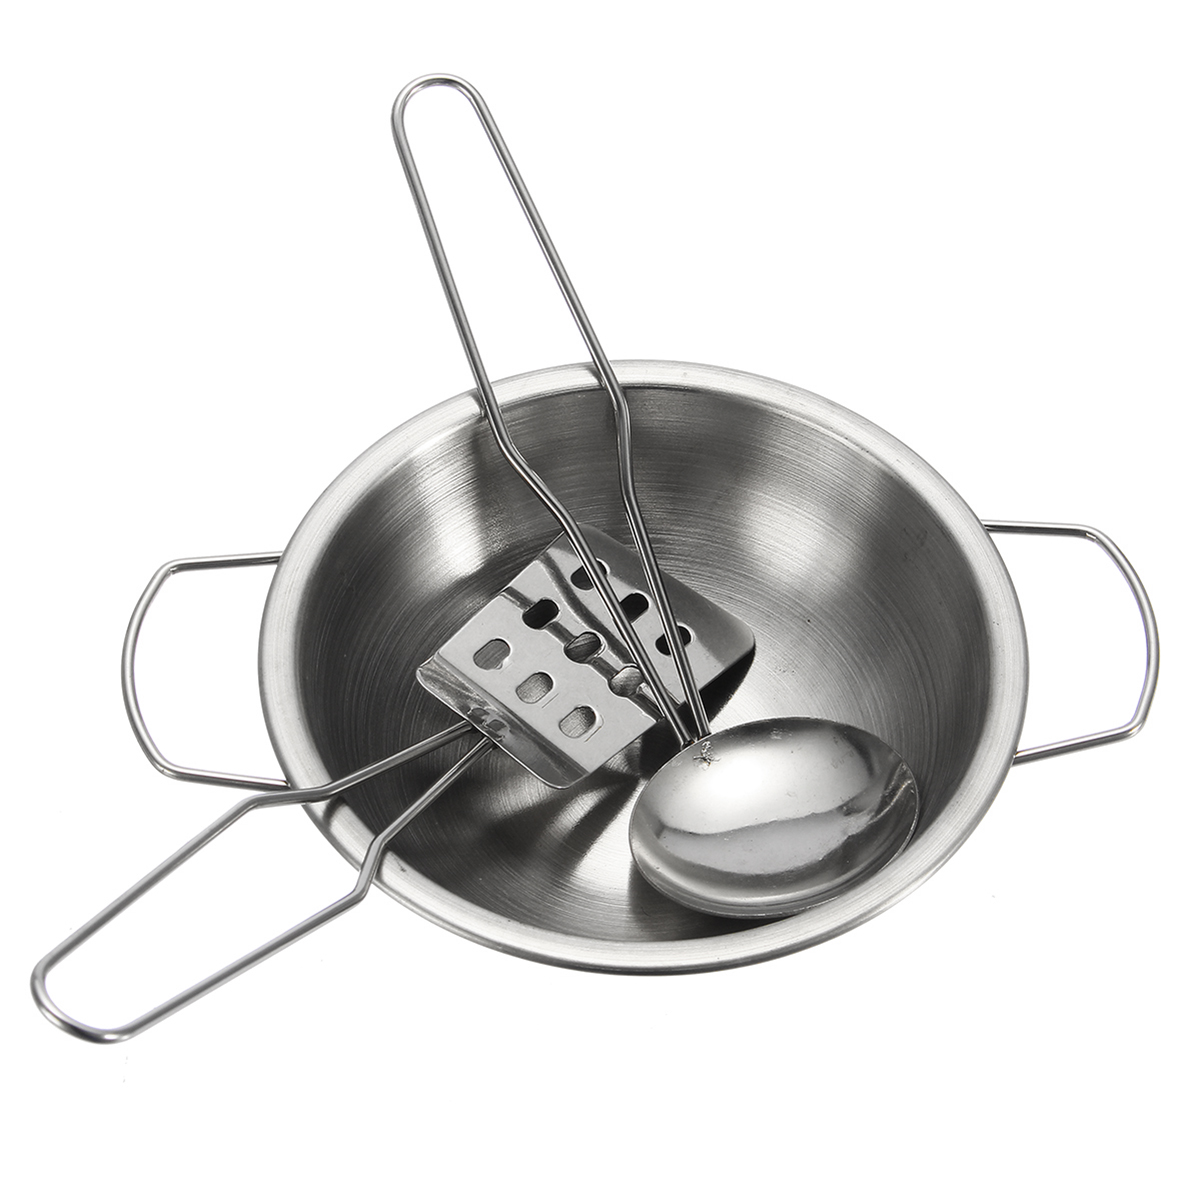 10pc-Stainless-steel-Cookware-Kitchen-Cooking-Set-Pot-Pans-House-Play-Toy-For-Children-1418086-7